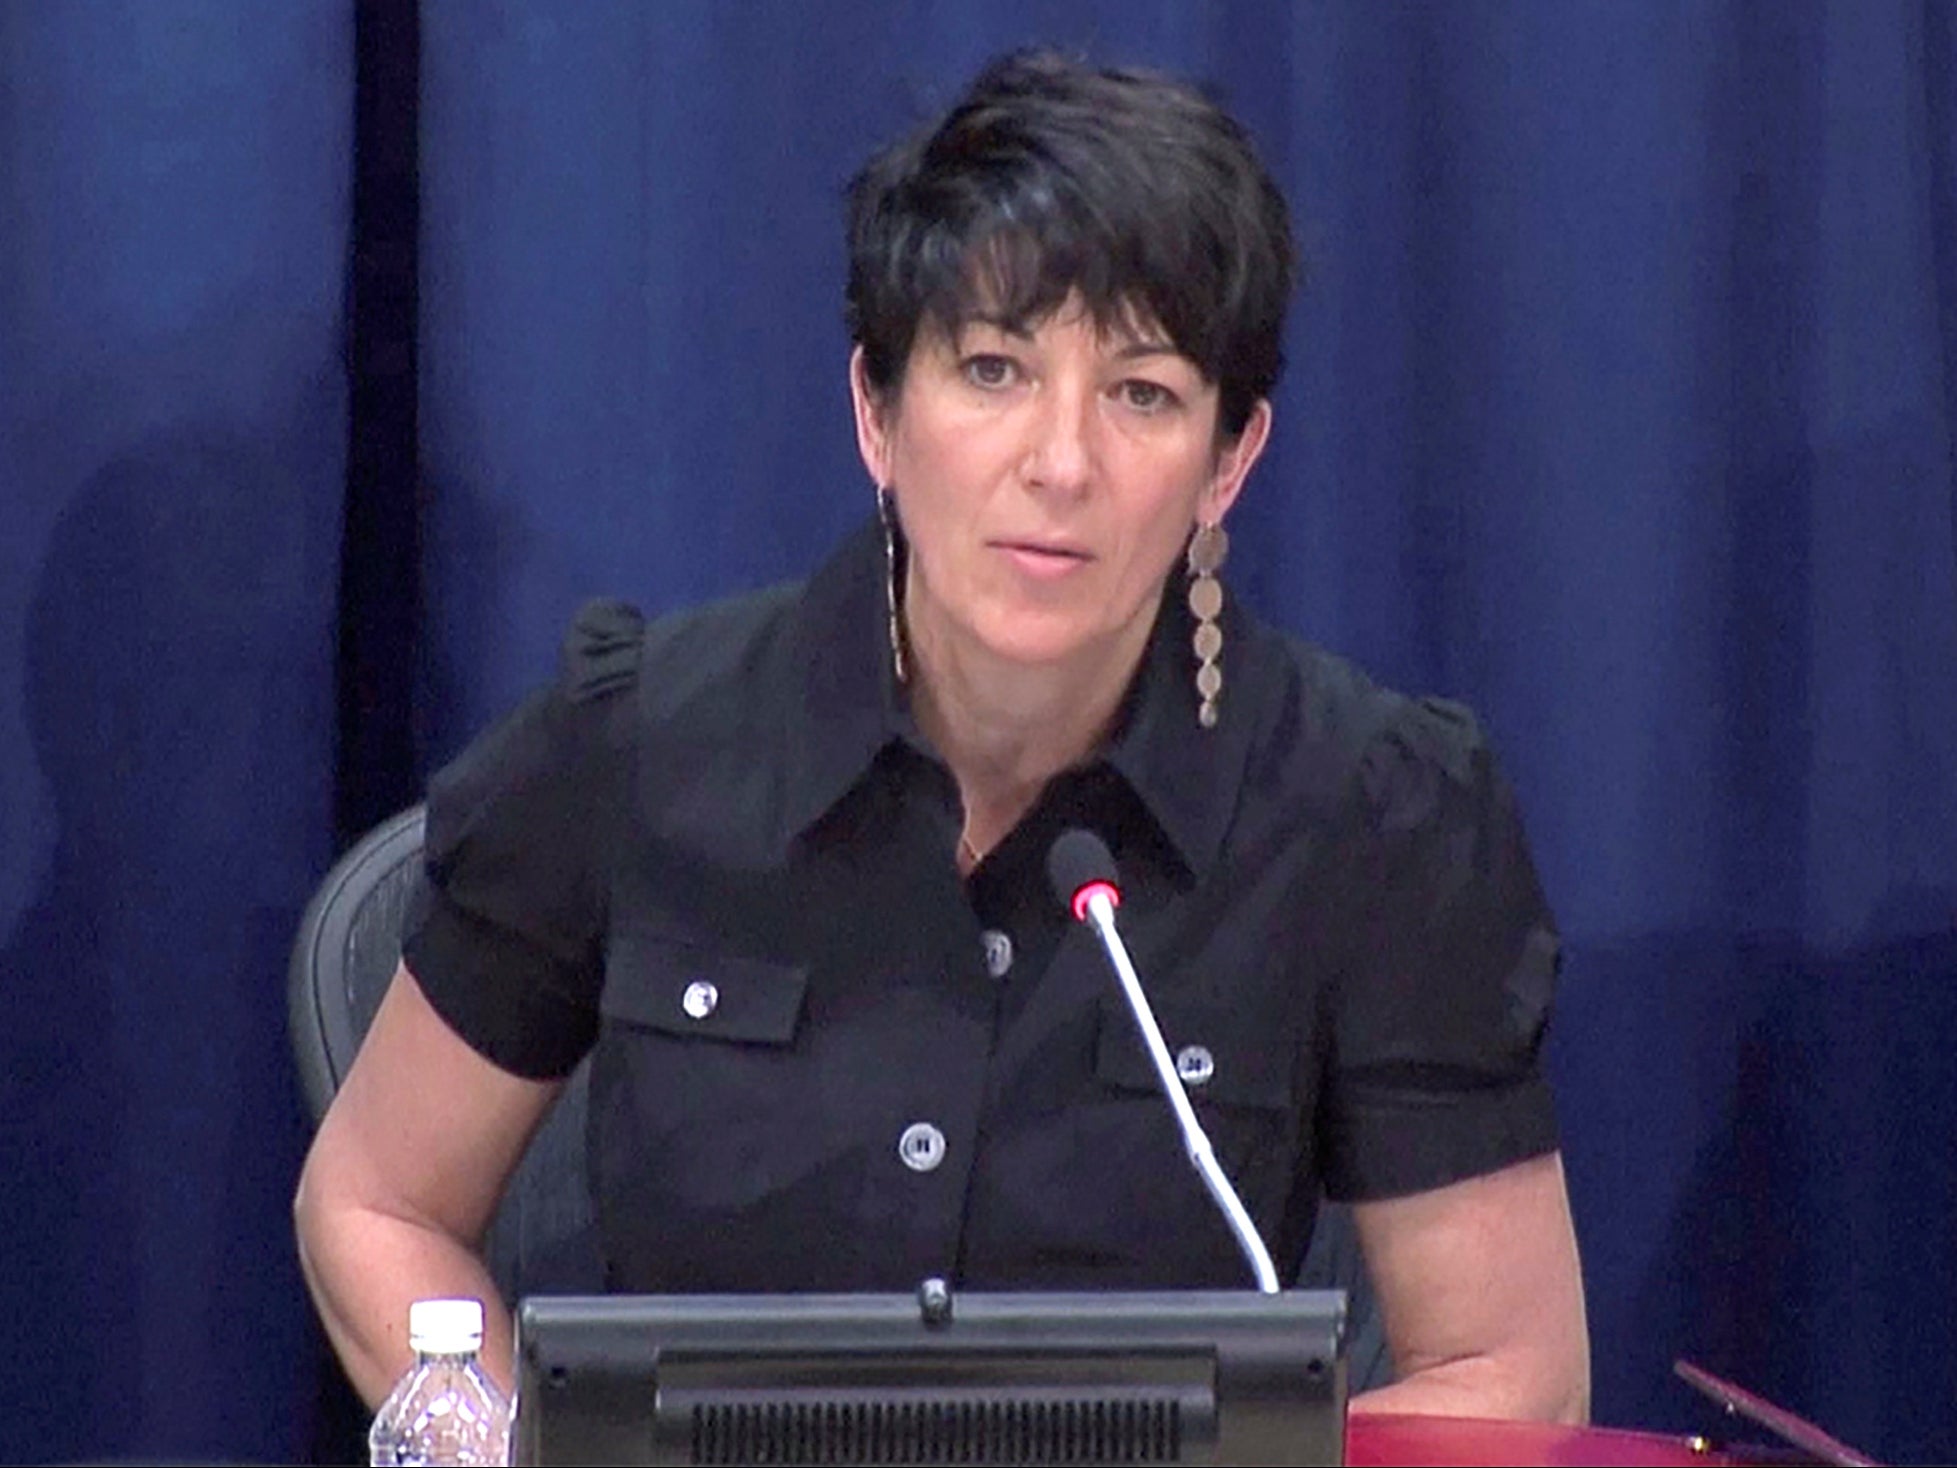 Ghislaine Maxwell is currently in jail in Brooklyn awaiting her trial in July